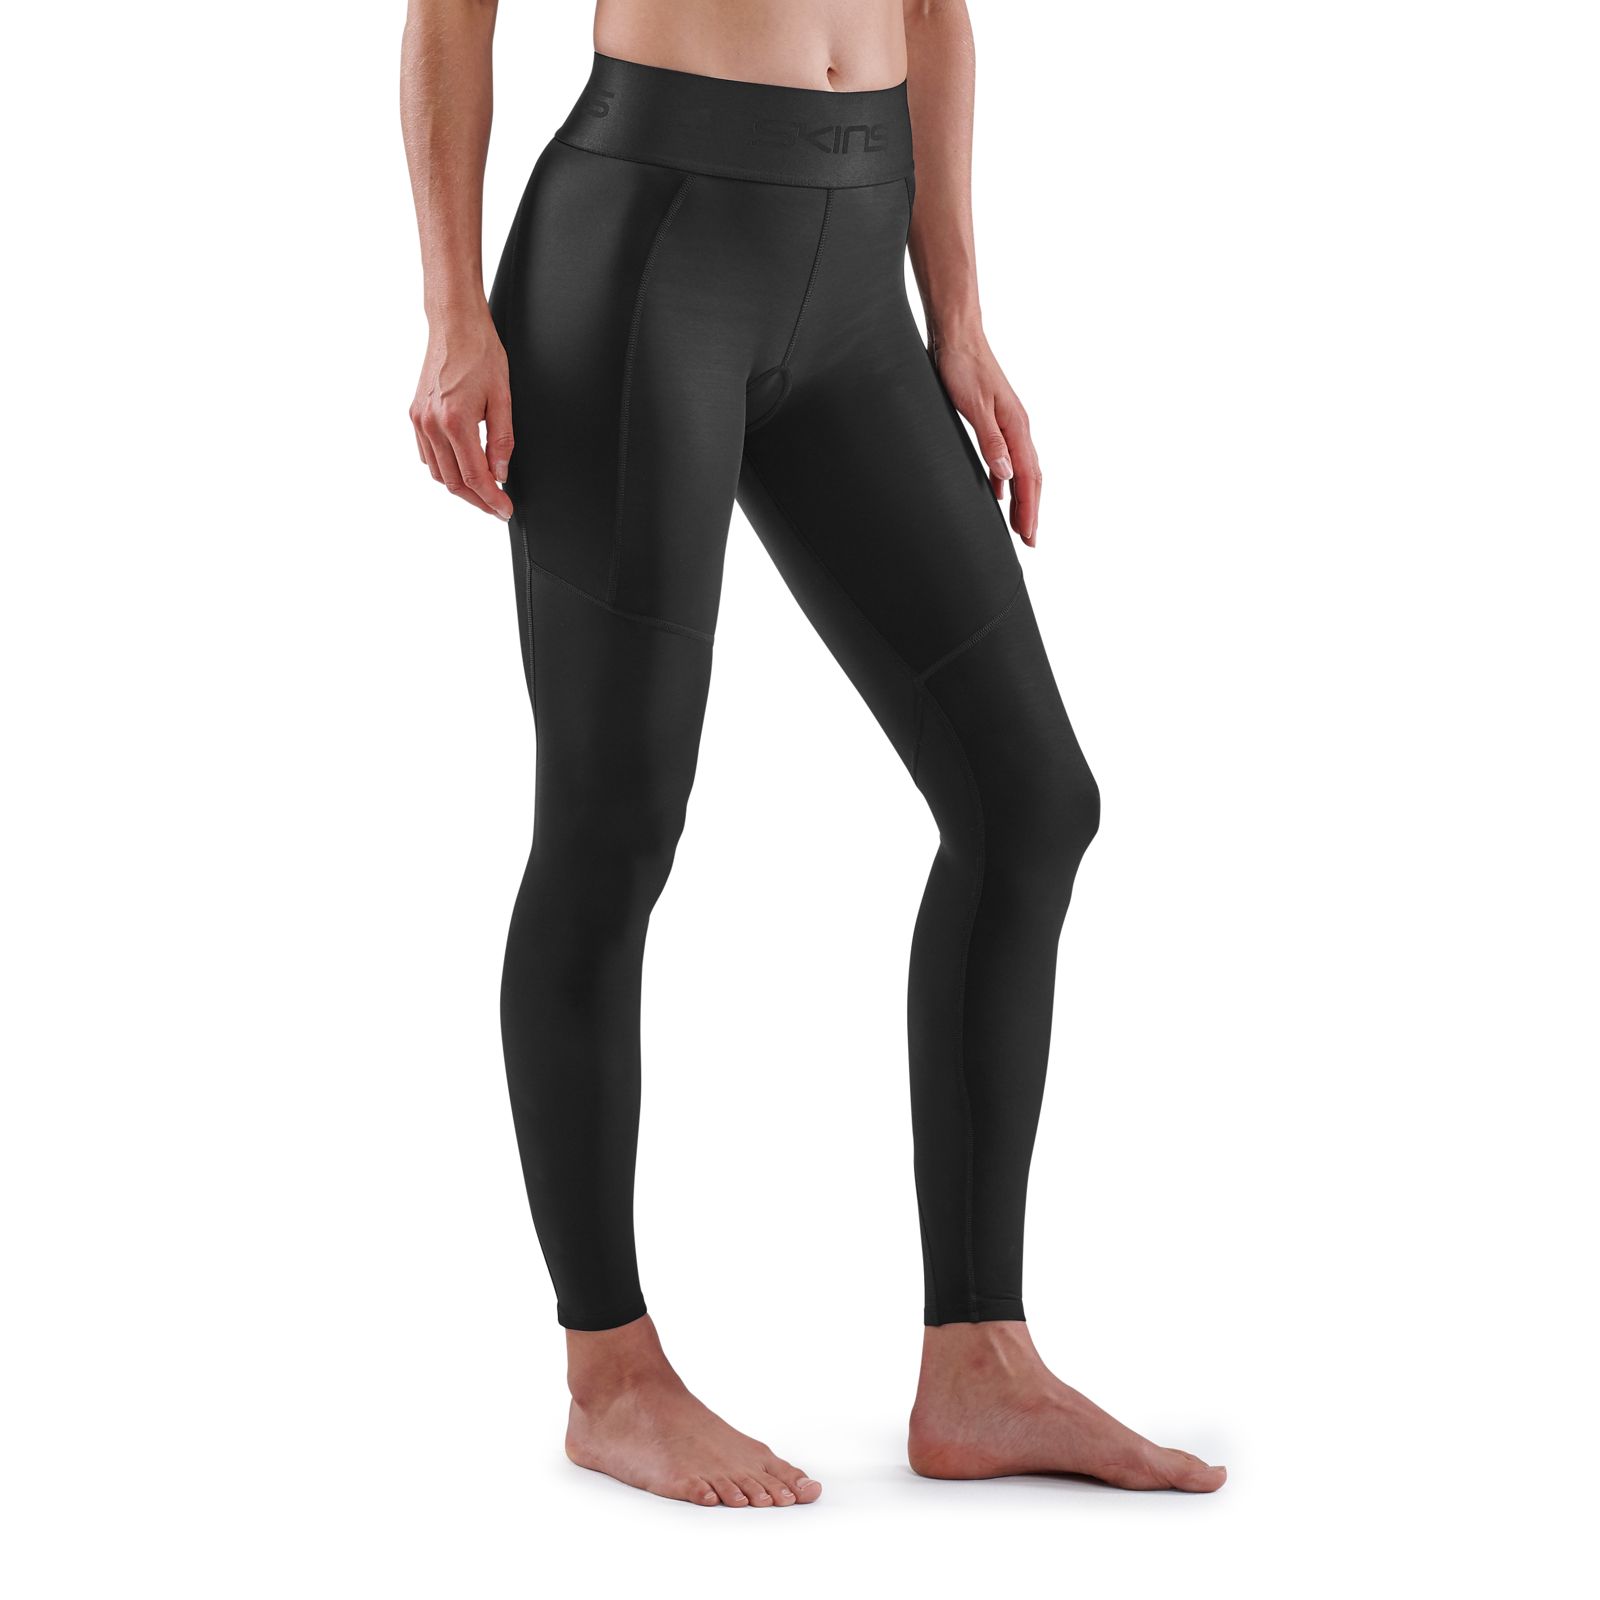 SKINS SERIES-3 WOMEN'S THERMAL LONG TIGHTS BLACK - SKINS Compression USA